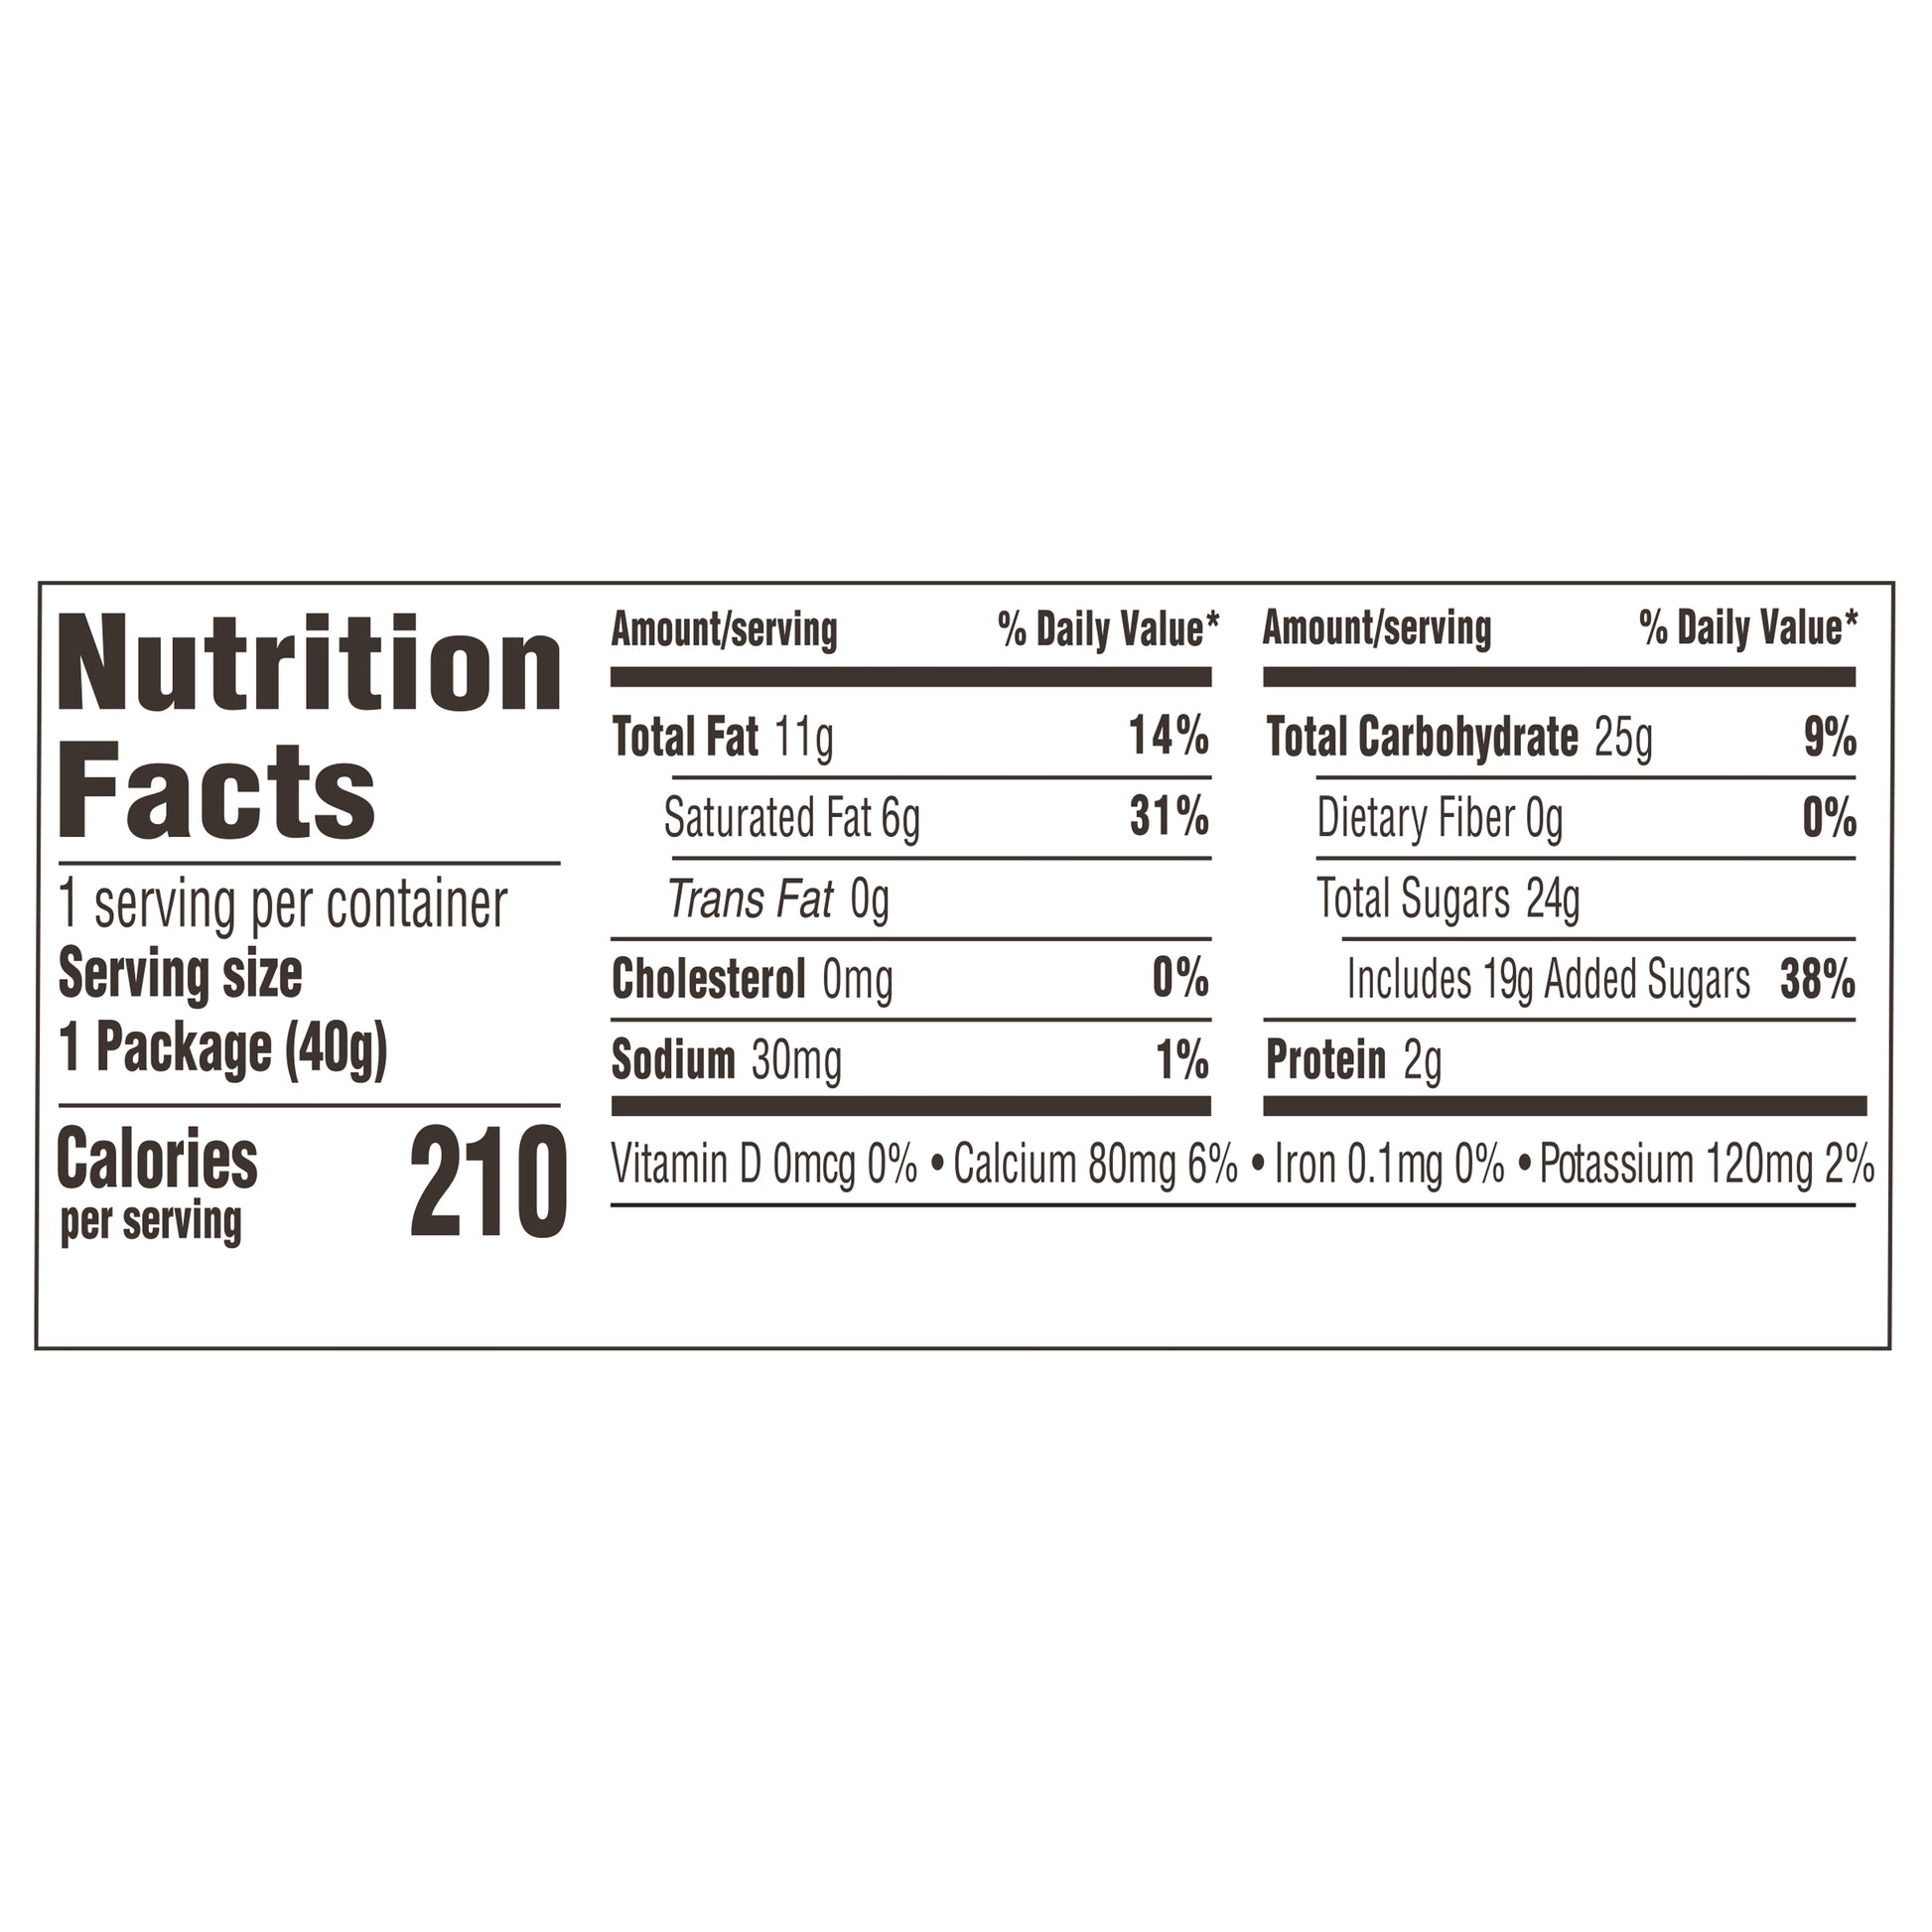 Nutrition facts label. Total fat 11 g, 14% daily value. Saturated fat 6g, 31%. Cholesterol 0mg, 0% daily value. Sodium 30mg, 1% daily value. Total Carbohydrate 25g, 9% daily value. Total Sugars 24g includes 19g added sugars, 38% daily value. Protein 2g. Calories per serving 210. 